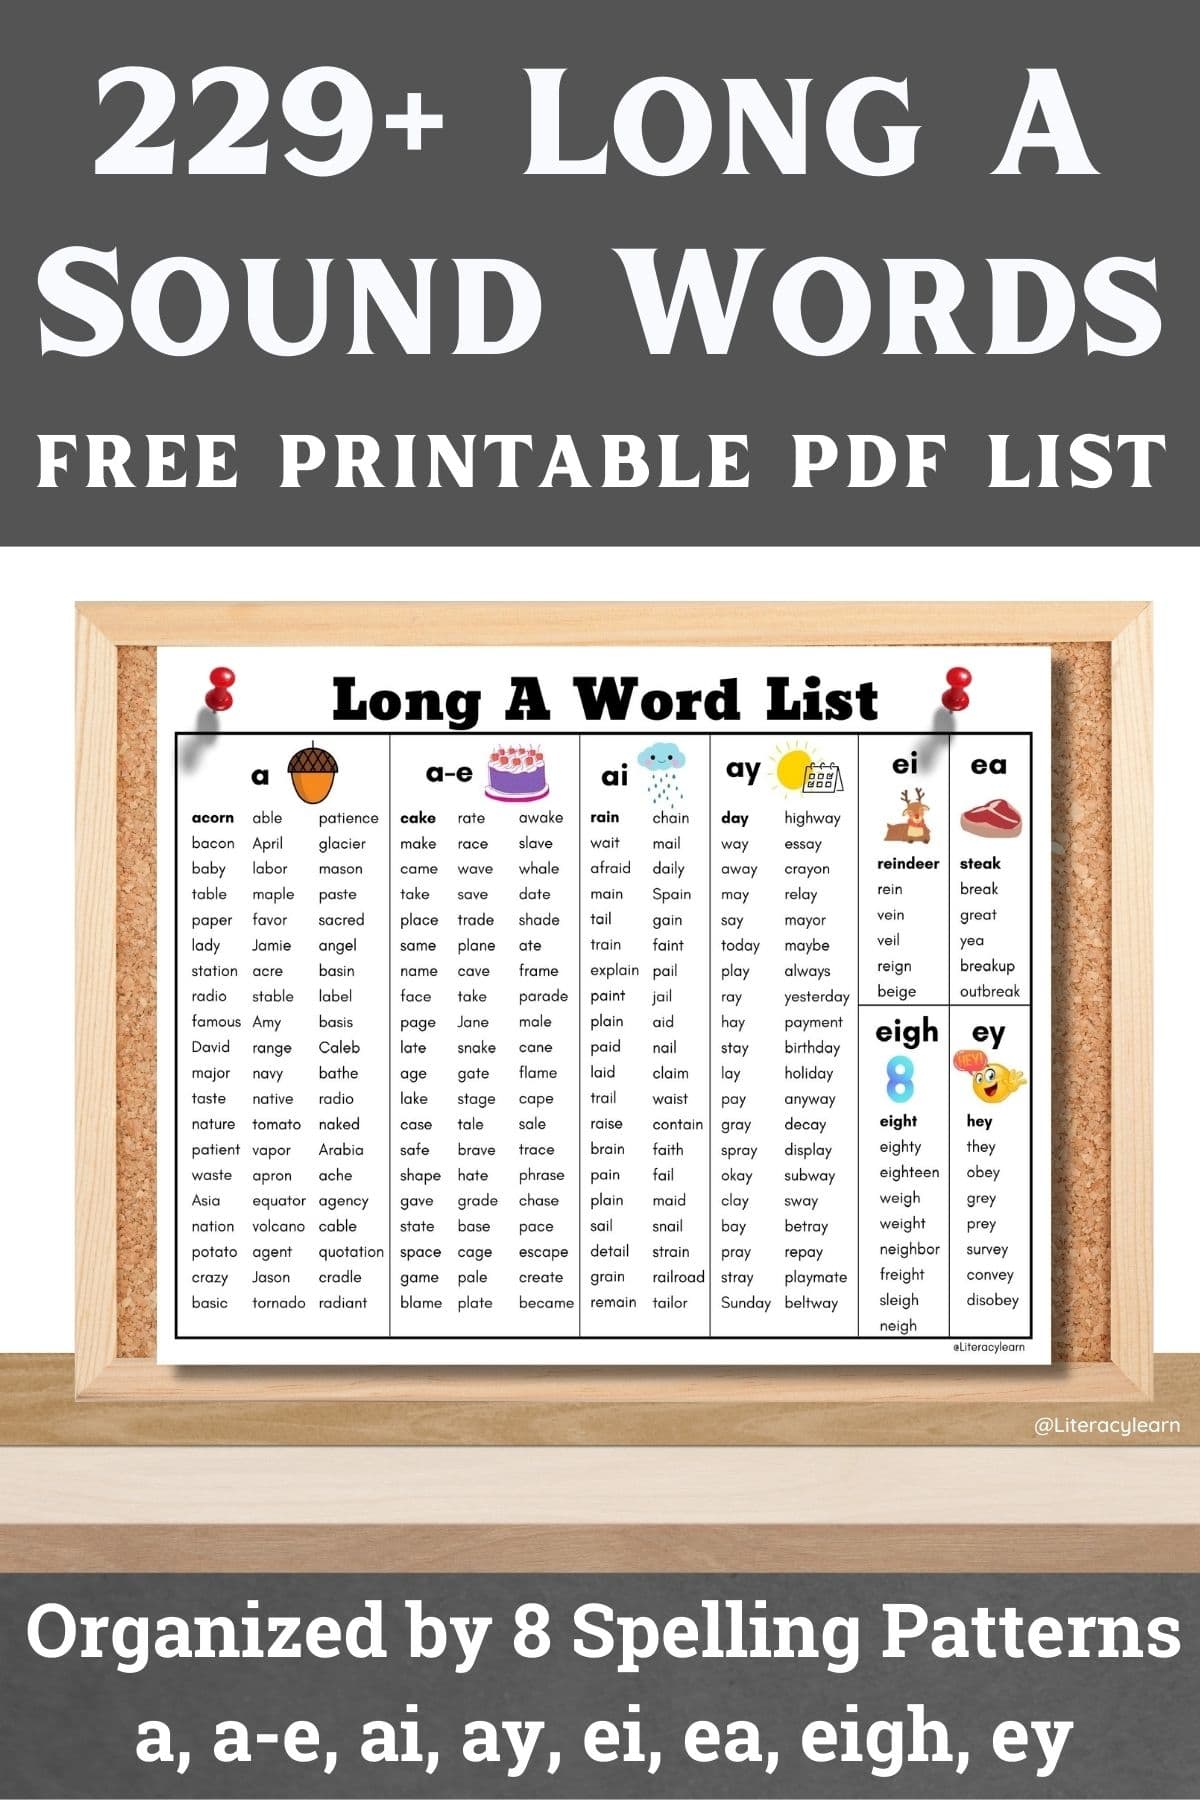 Corkboard image with list pinned to it. Text saying "229+ Long A Sound Words."